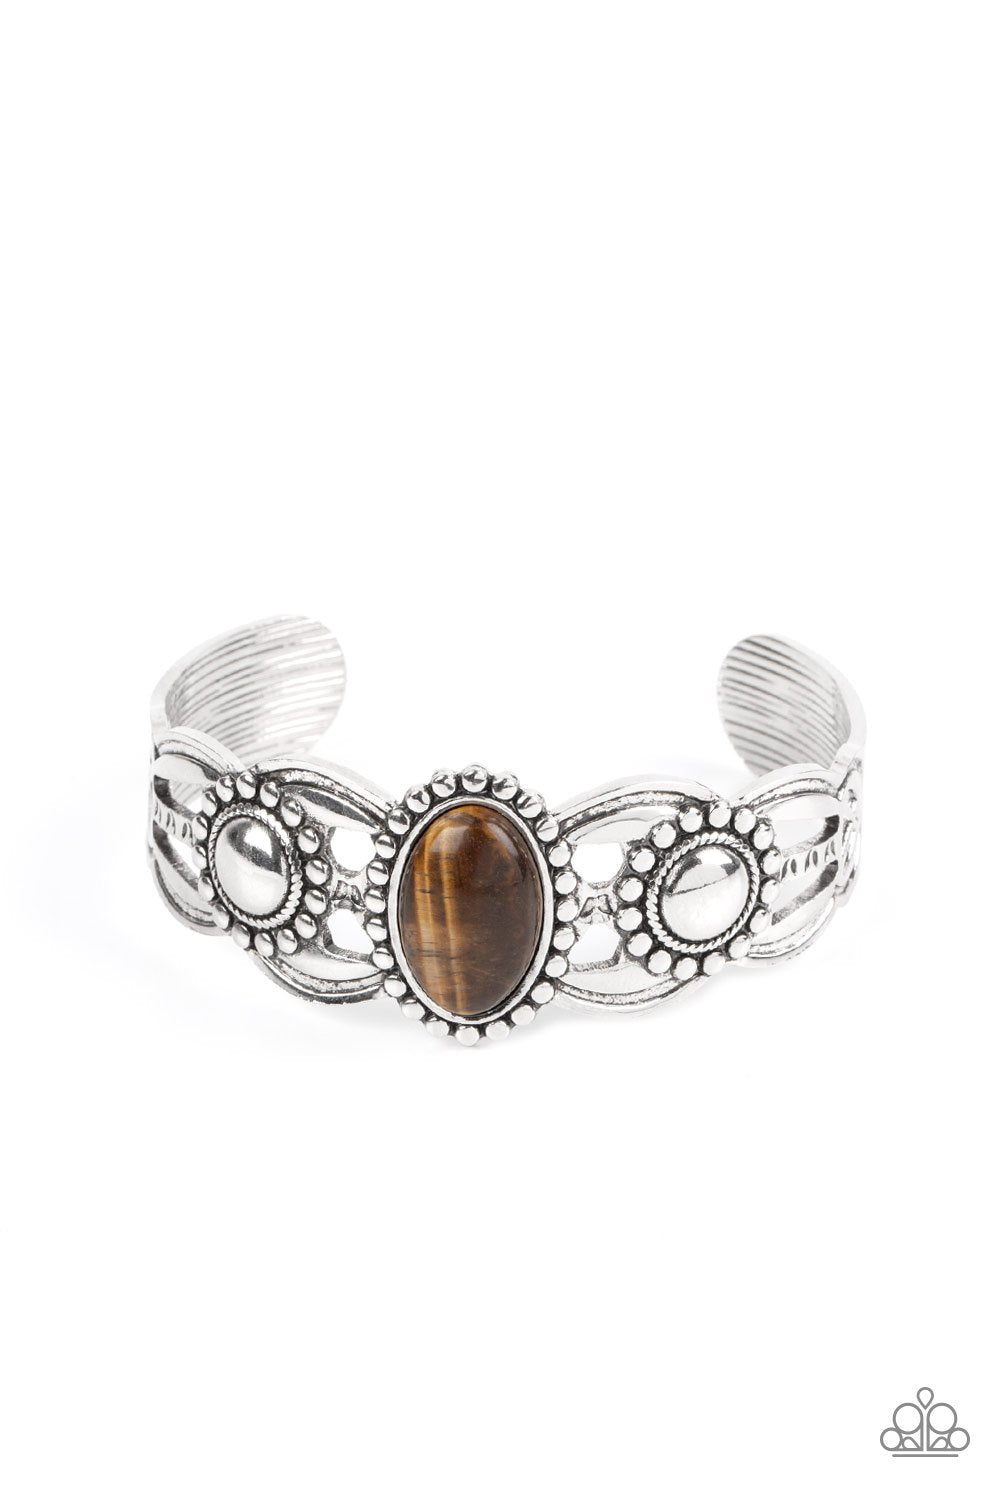 Solar Solstice Brown Tiger&#39;s Eye Stone and Silver Cuff Bracelet - Paparazzi Accessories 2021 Convention Exclusive- lightbox - CarasShop.com - $5 Jewelry by Cara Jewels